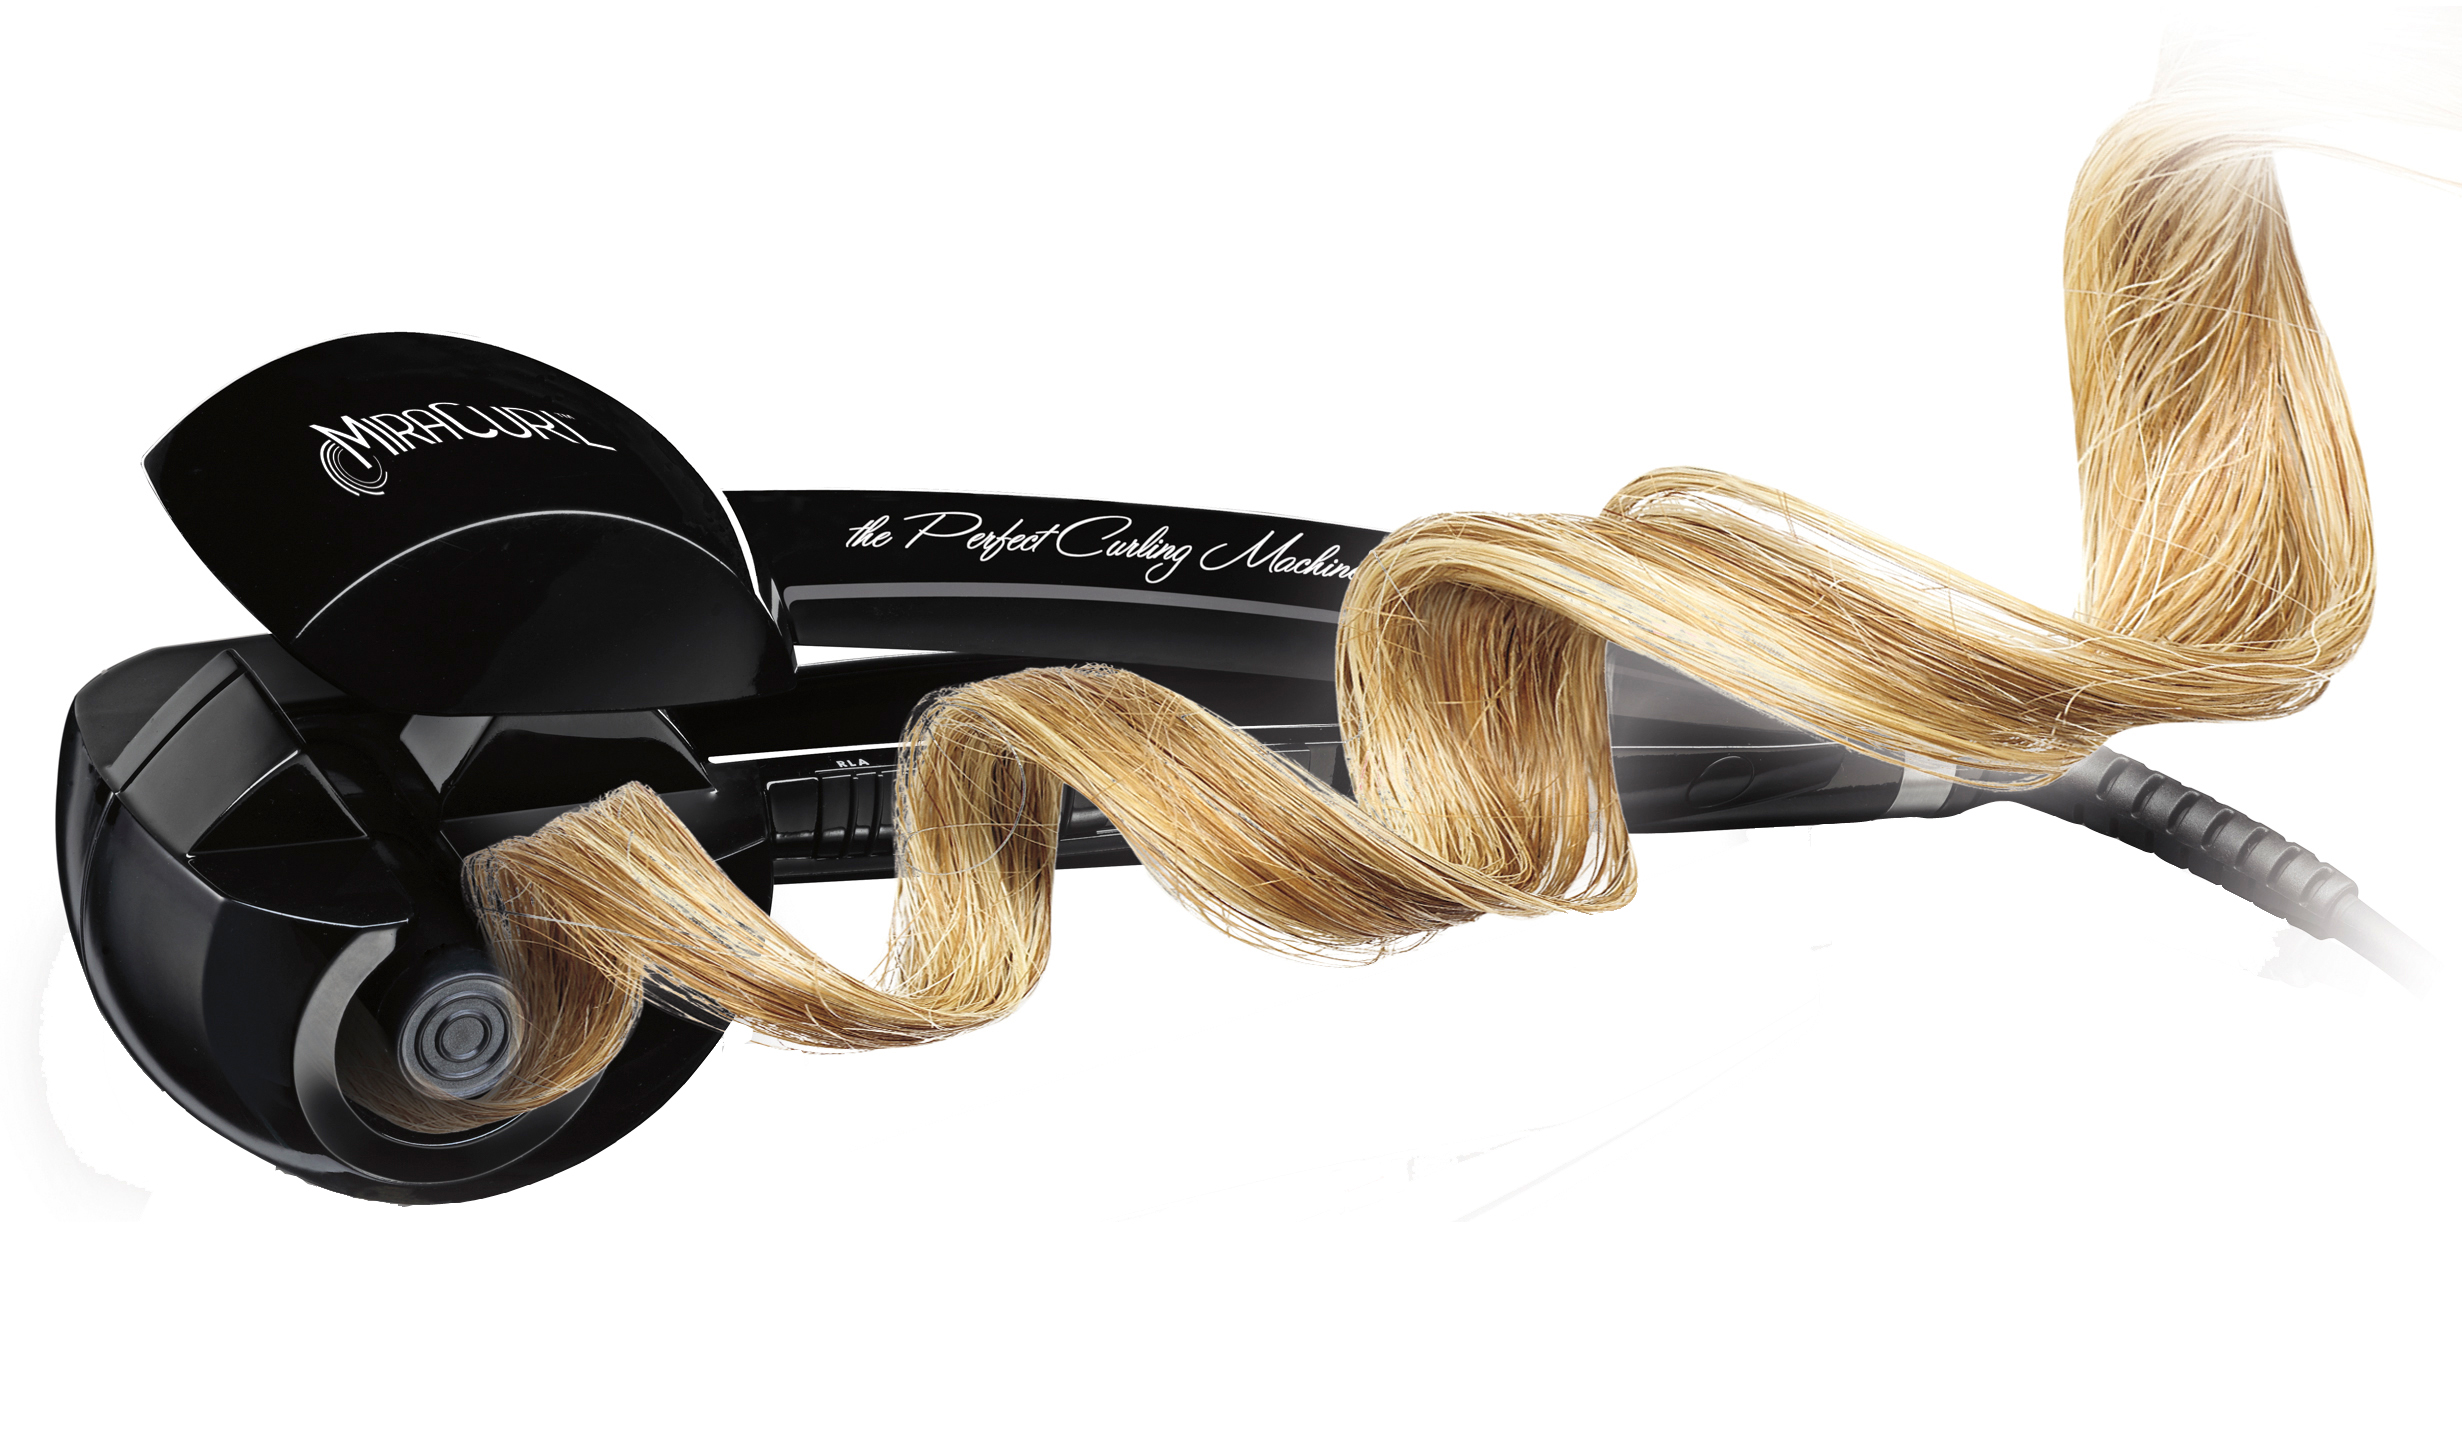 Babyliss perfect curl